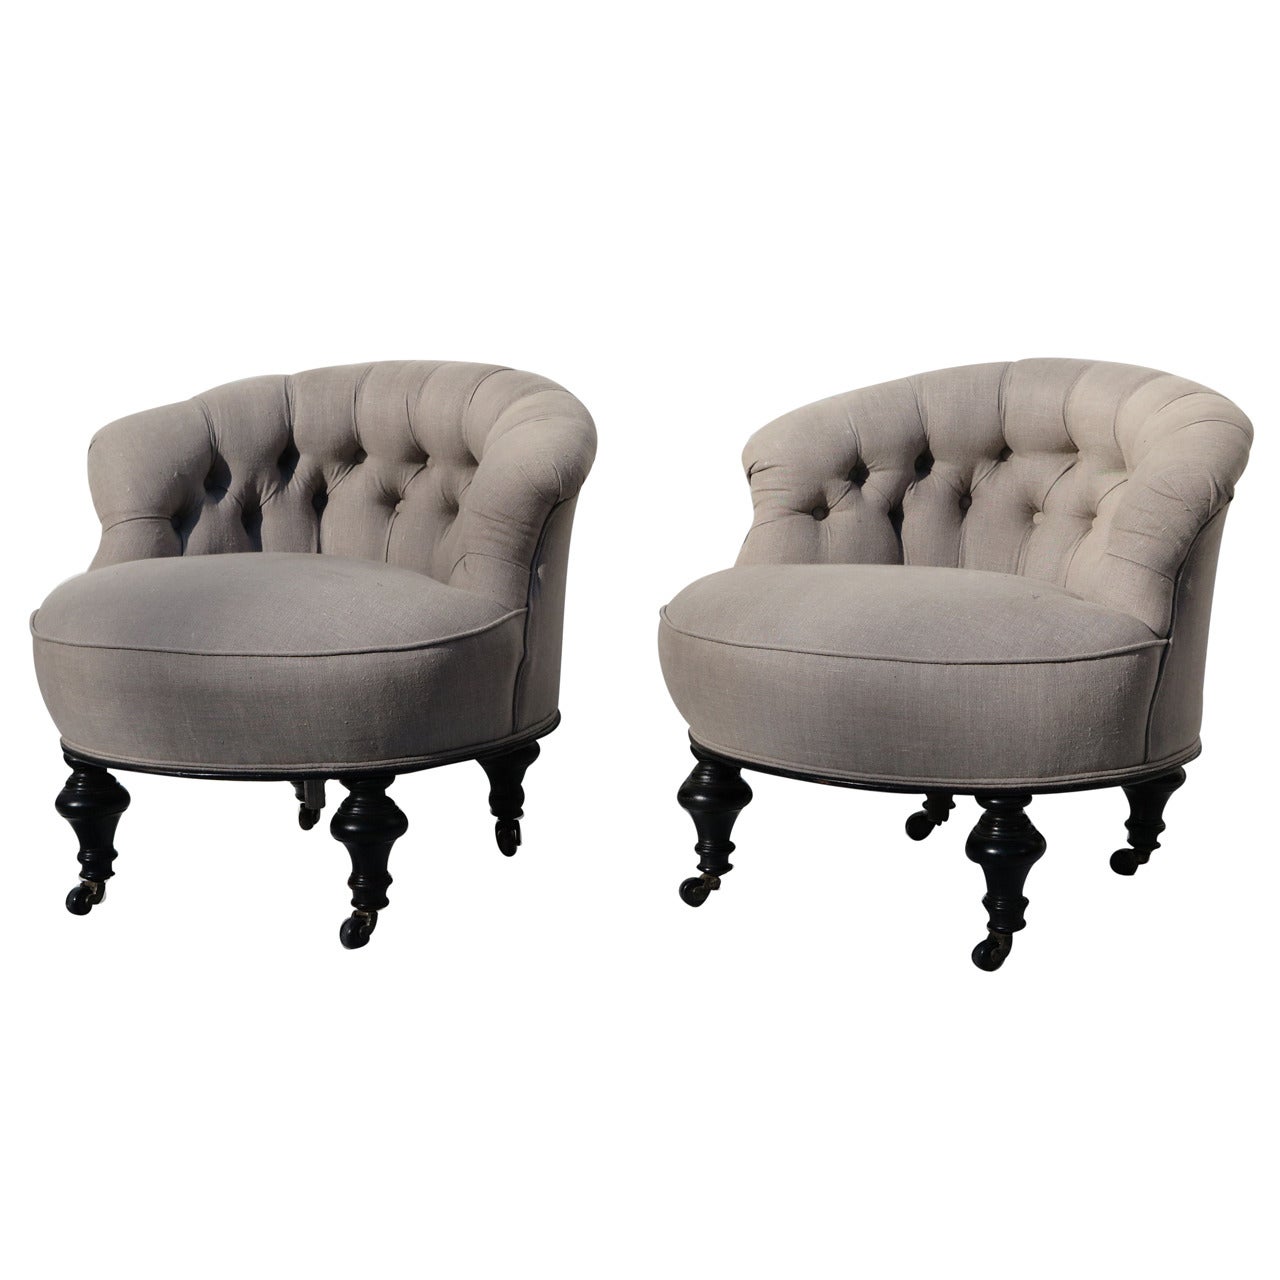 Pair of French Boudoir Chairs For Sale